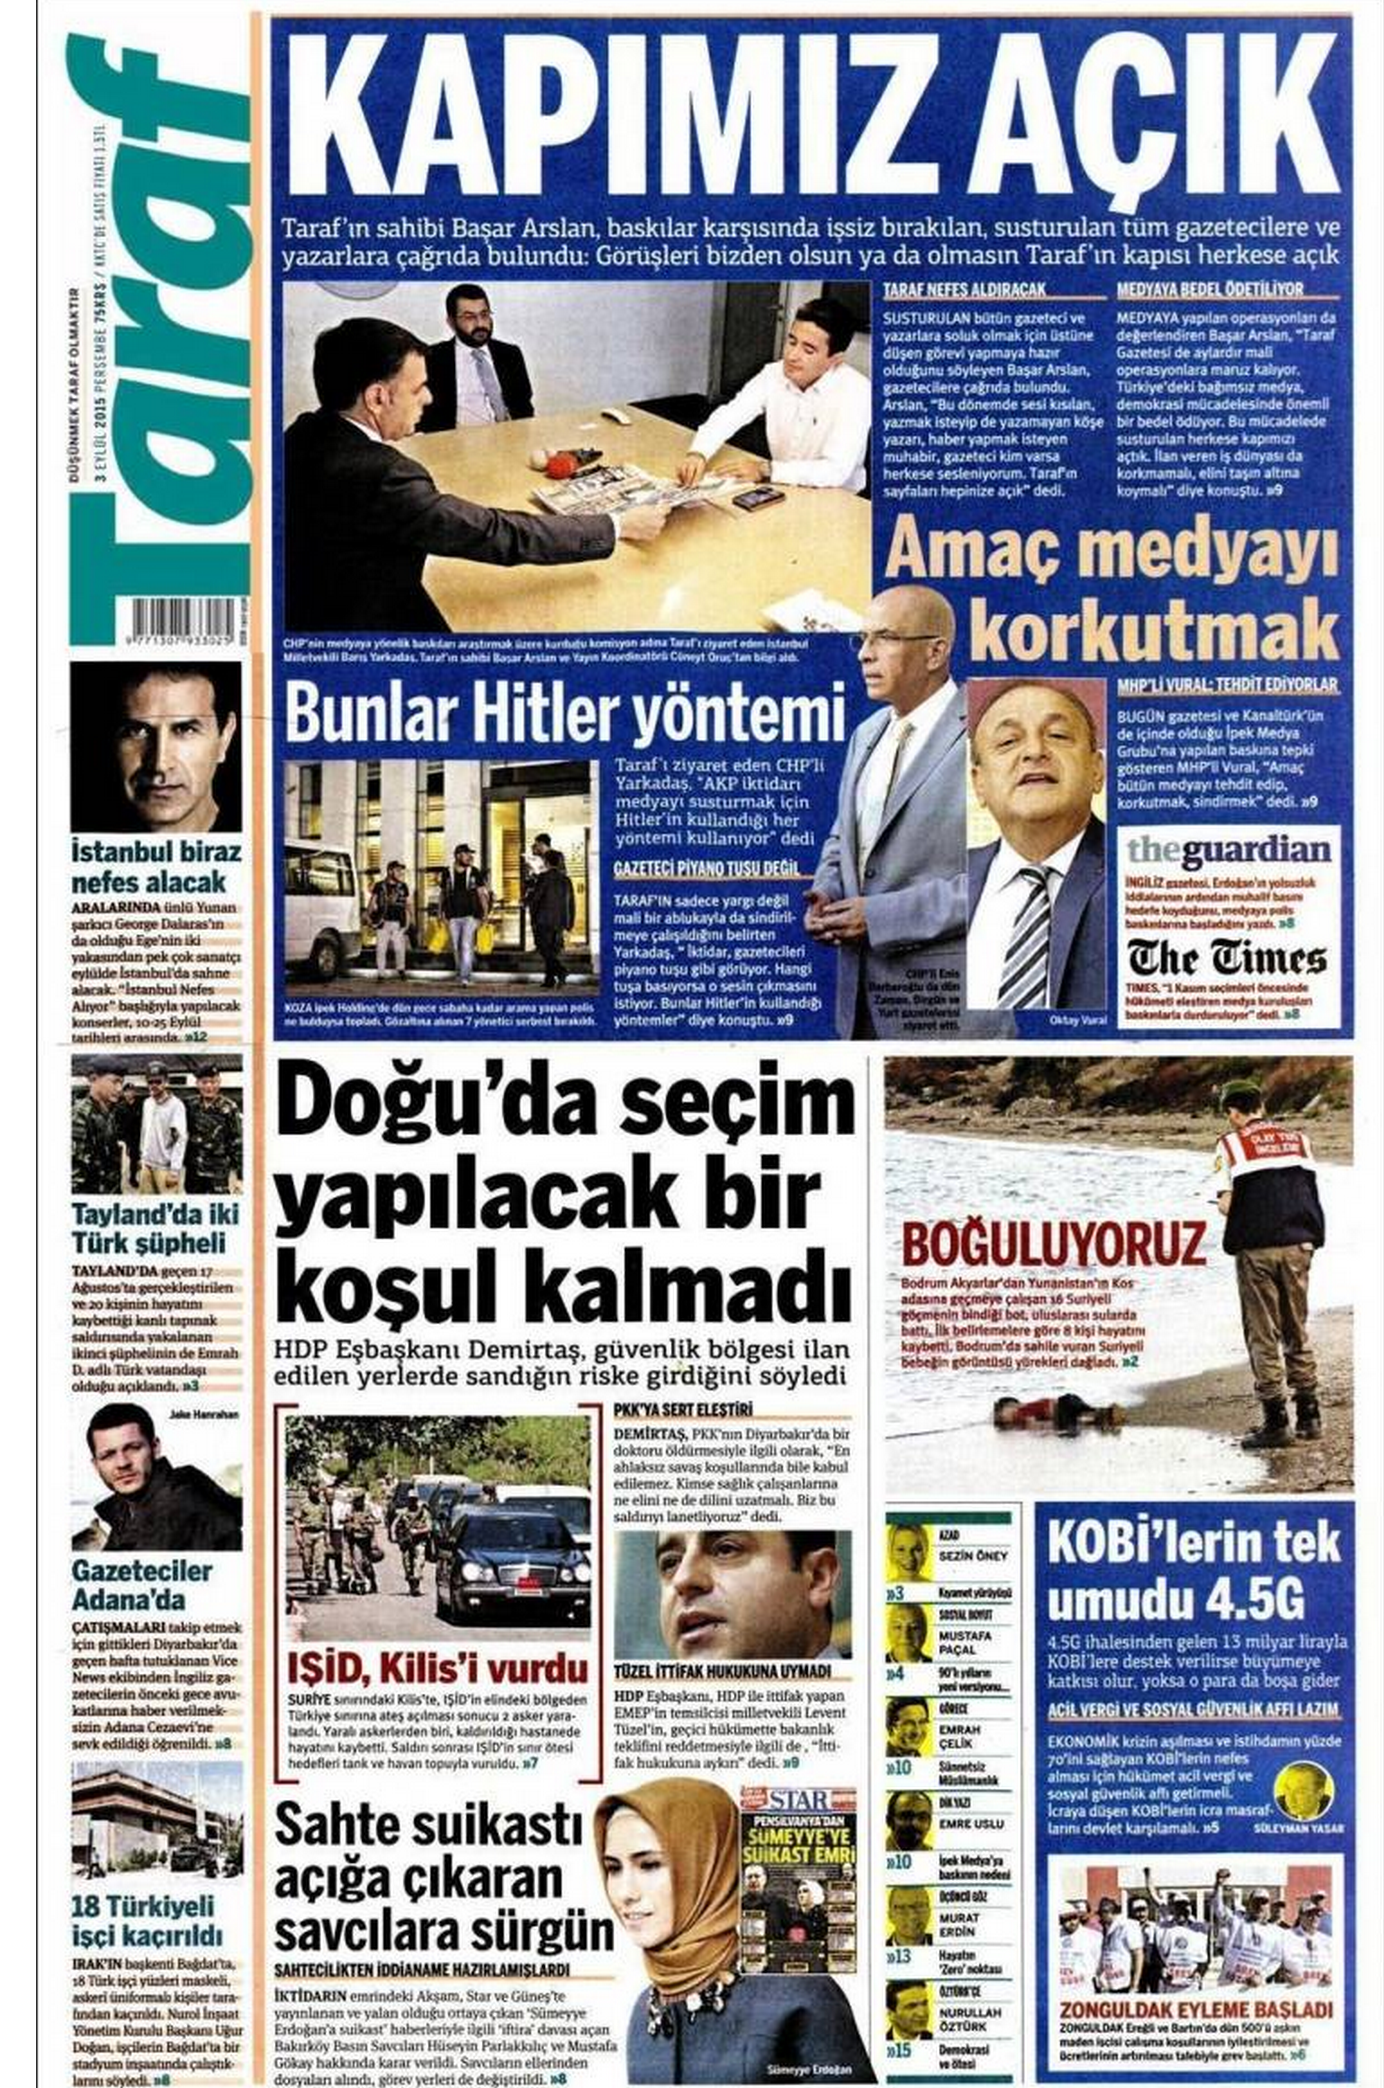 Drowned Migrant Boy Taraf front page